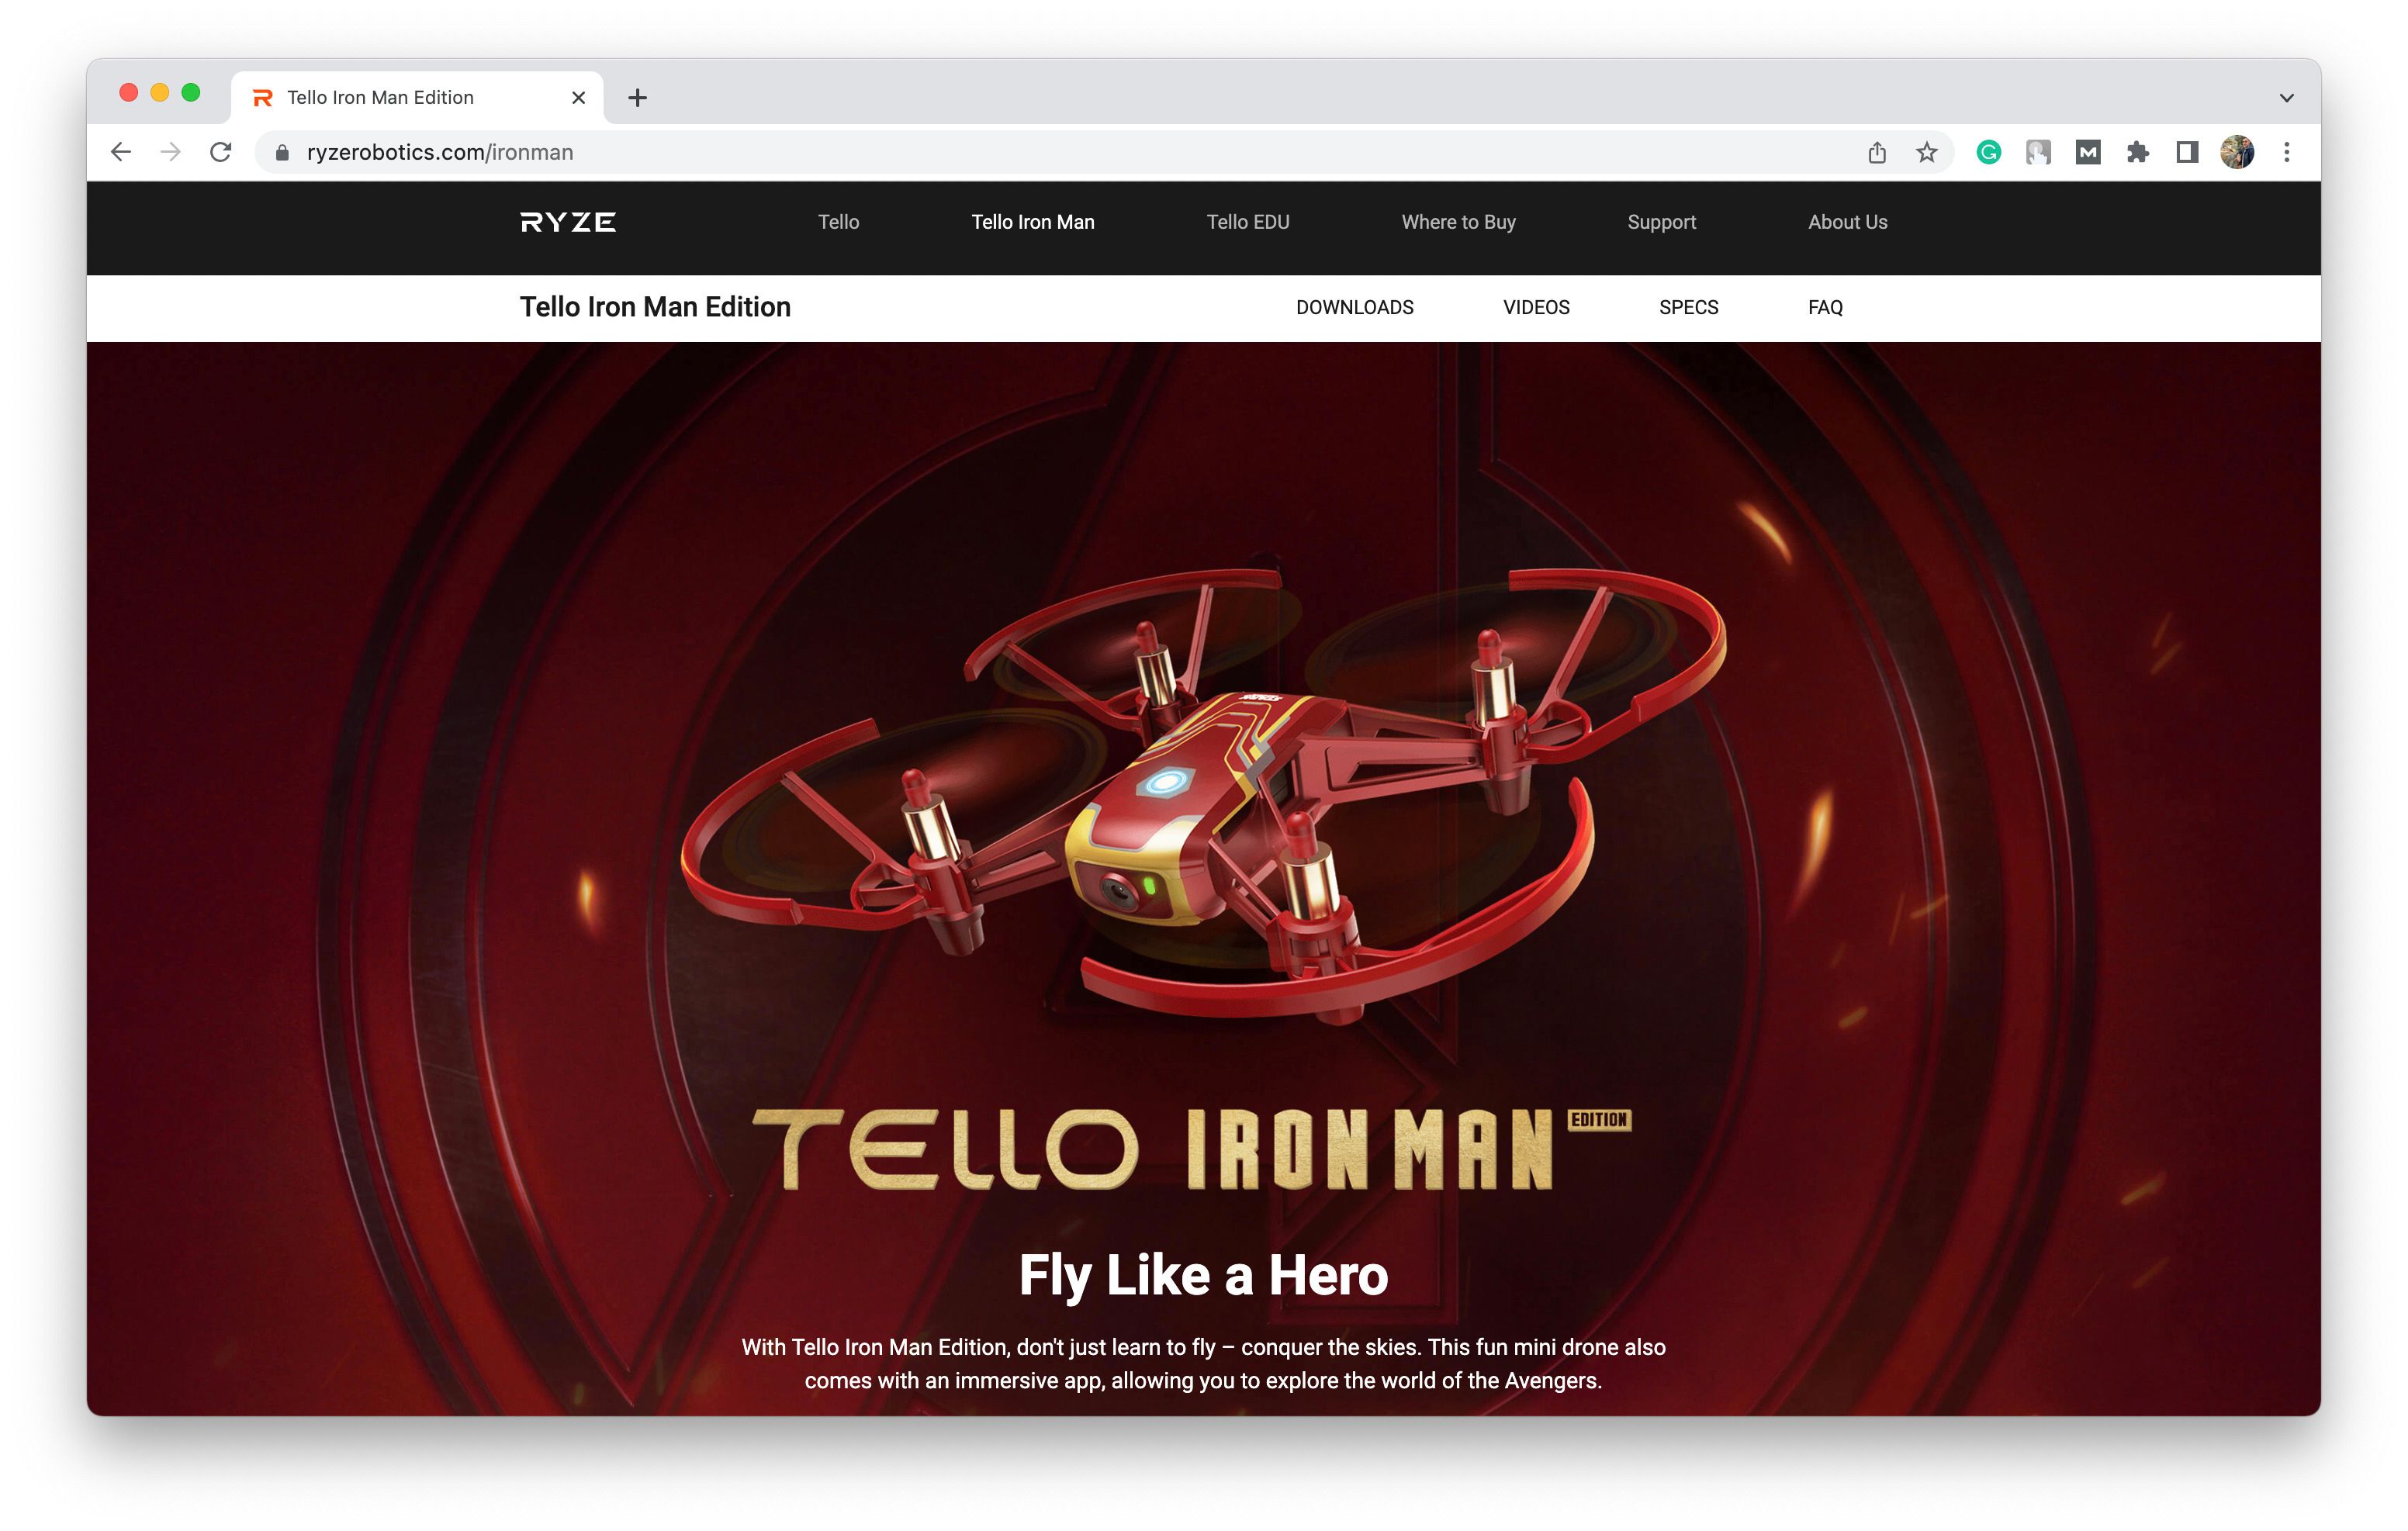 Drone applications like Ryze are mainly targeted at regular drone software users who simply want to use the drone for entertainment or other non-professional reasons (*Shots from [Ryze Tello](https://www.ryzerobotics.com/ironman){ rel="nofollow" target="_blank" .default-md}*)